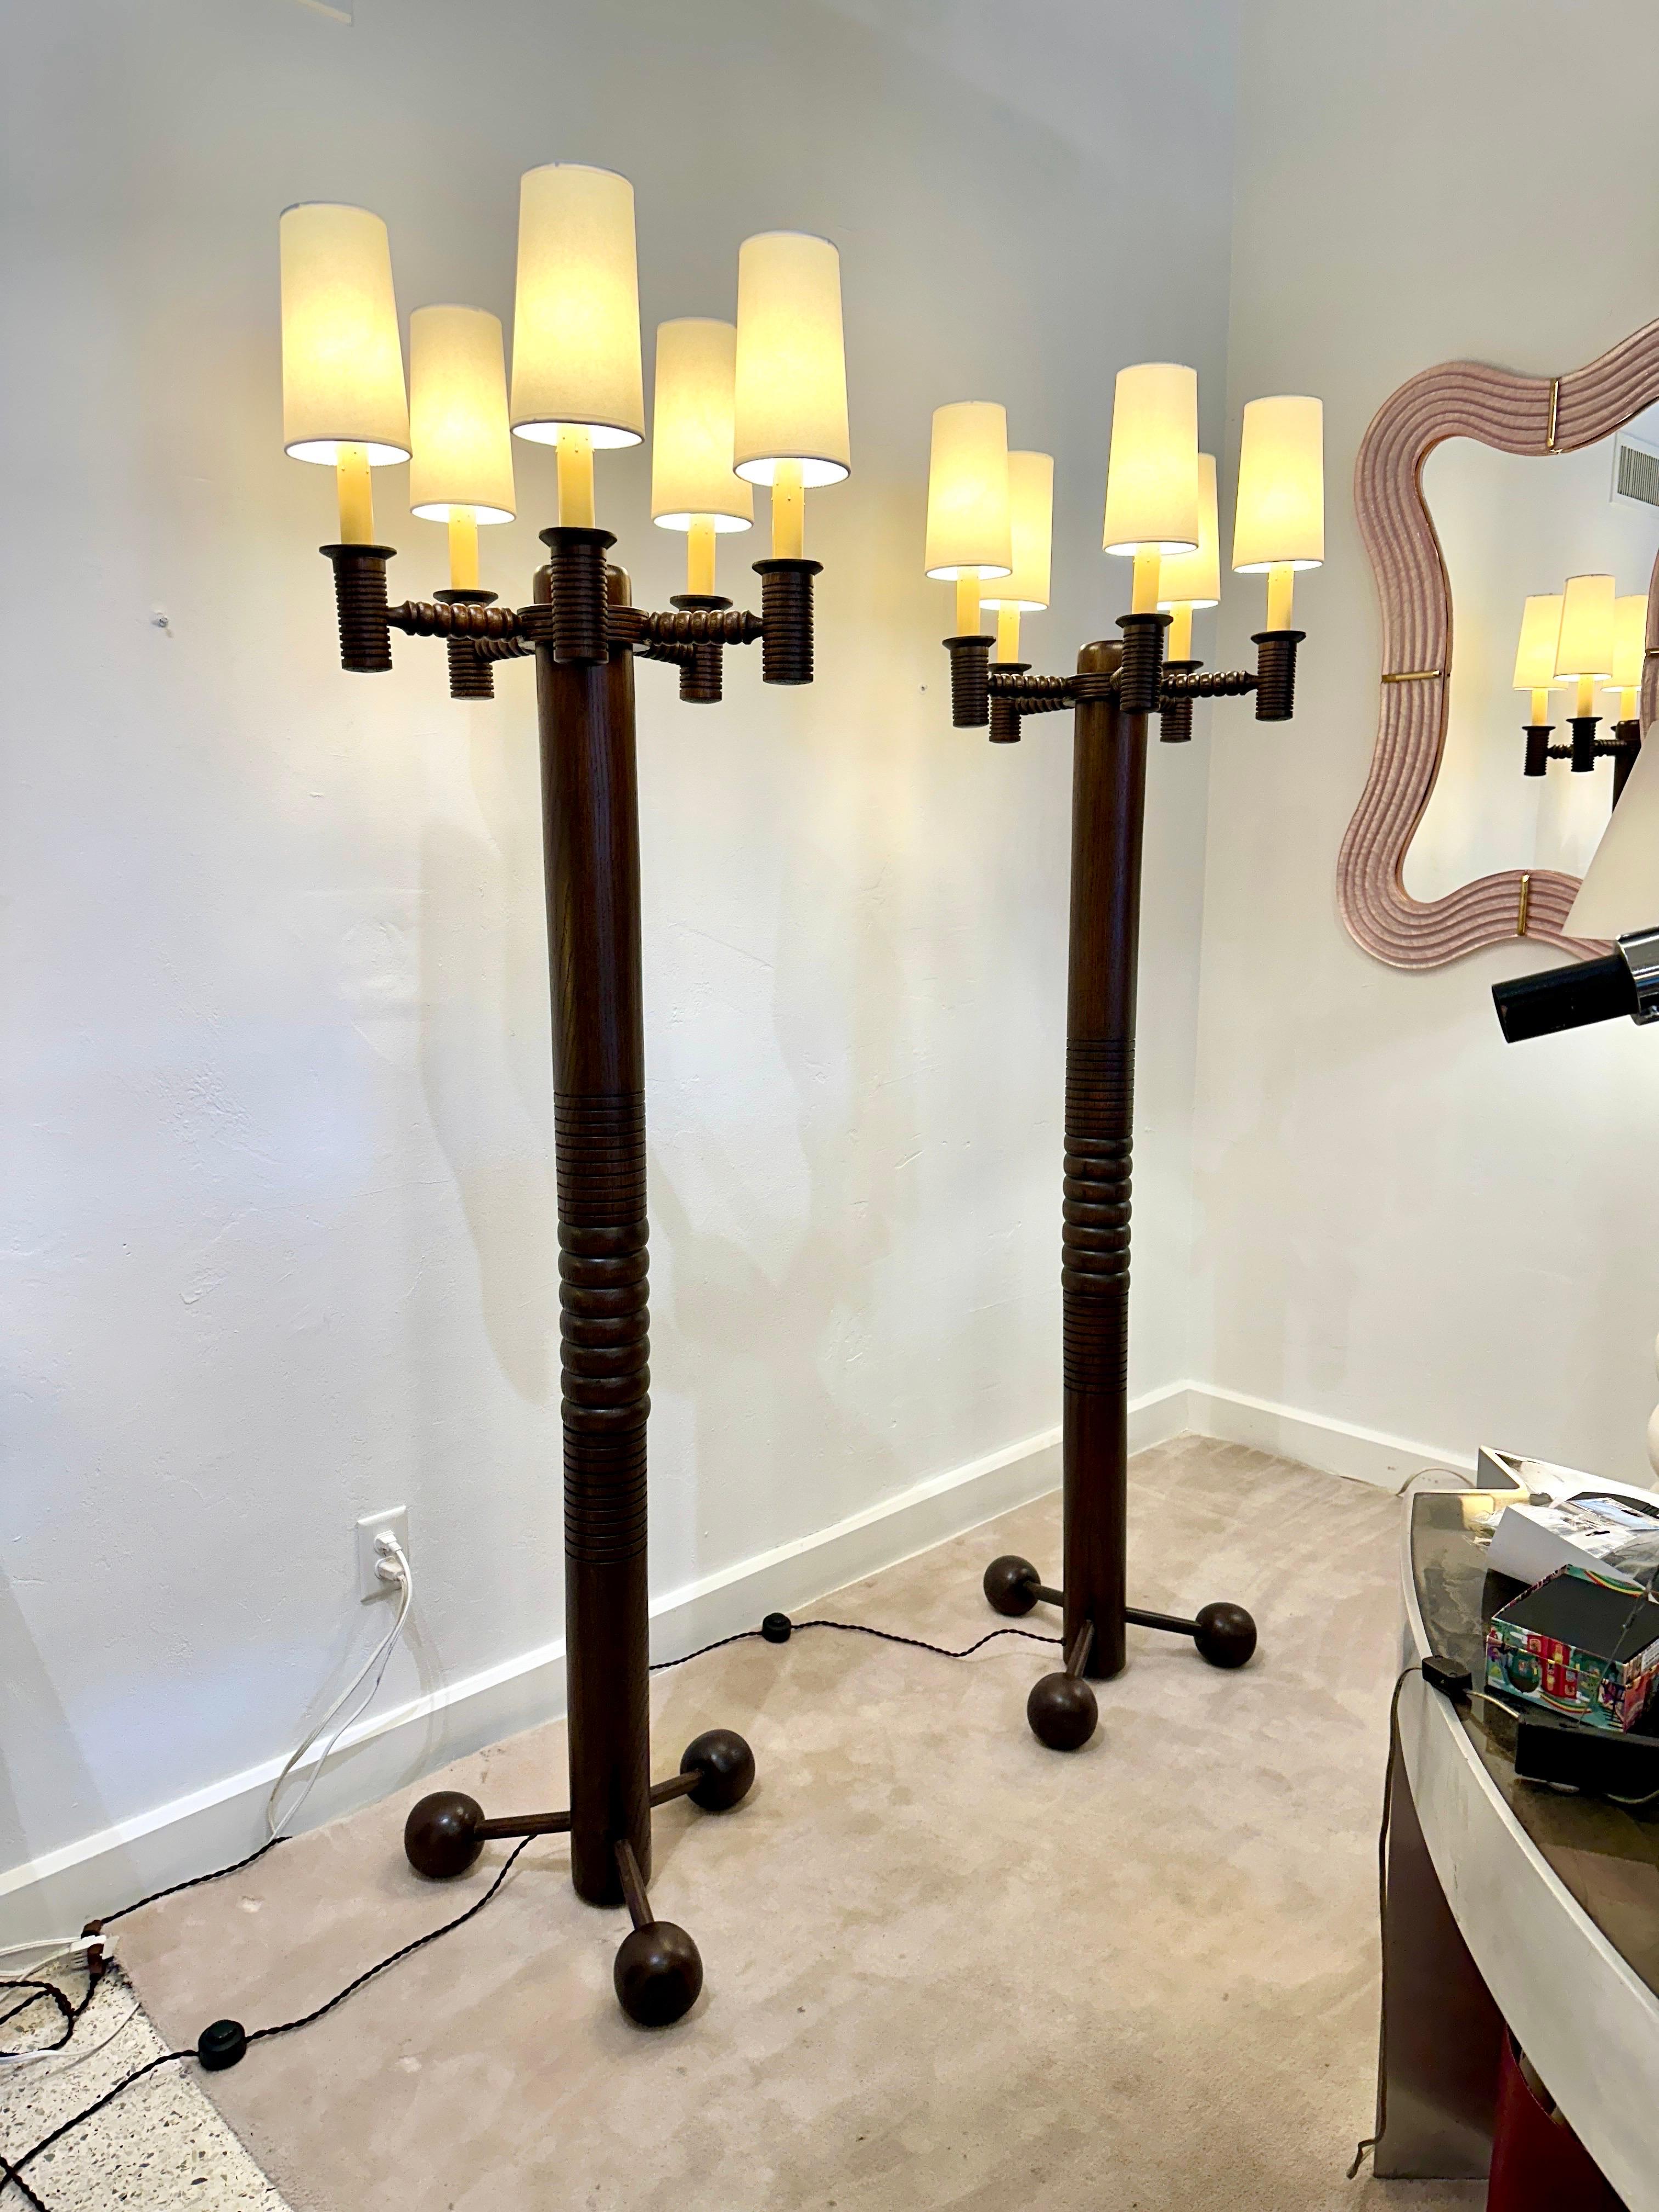 Wonderful craftsmanship of this solid French oak 5-light candelabra style floor lamp with NEW paper shades.  The oversized proportions and attention to detailed carving throughout make this a wonderful and elegant lighting option.  NOTE:  There are